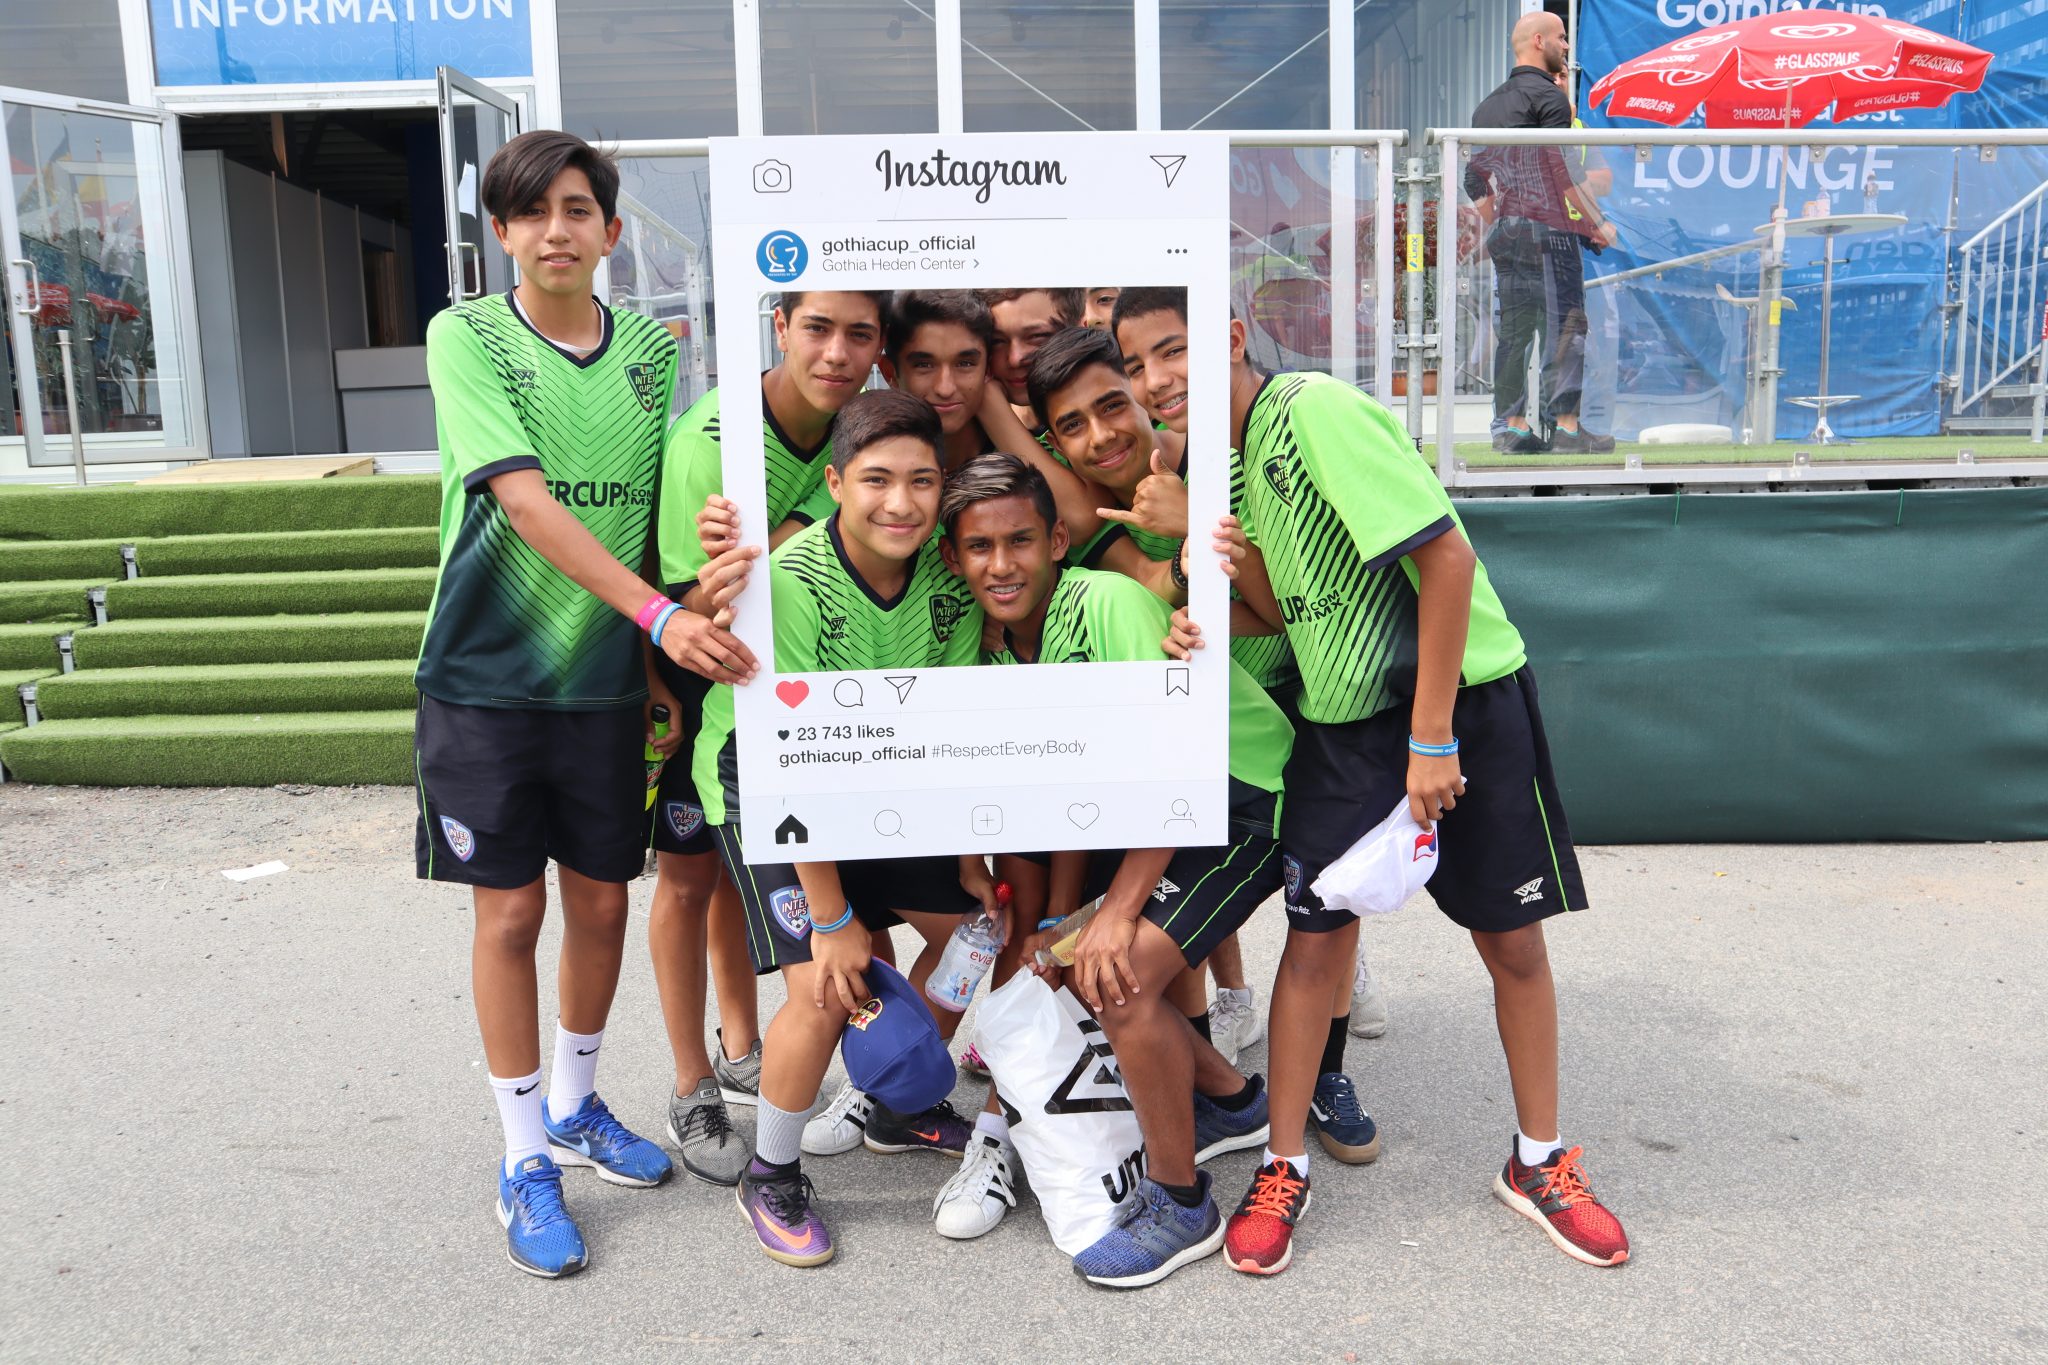 Gothia Cup - players with the Instagram frame - Road to Sport